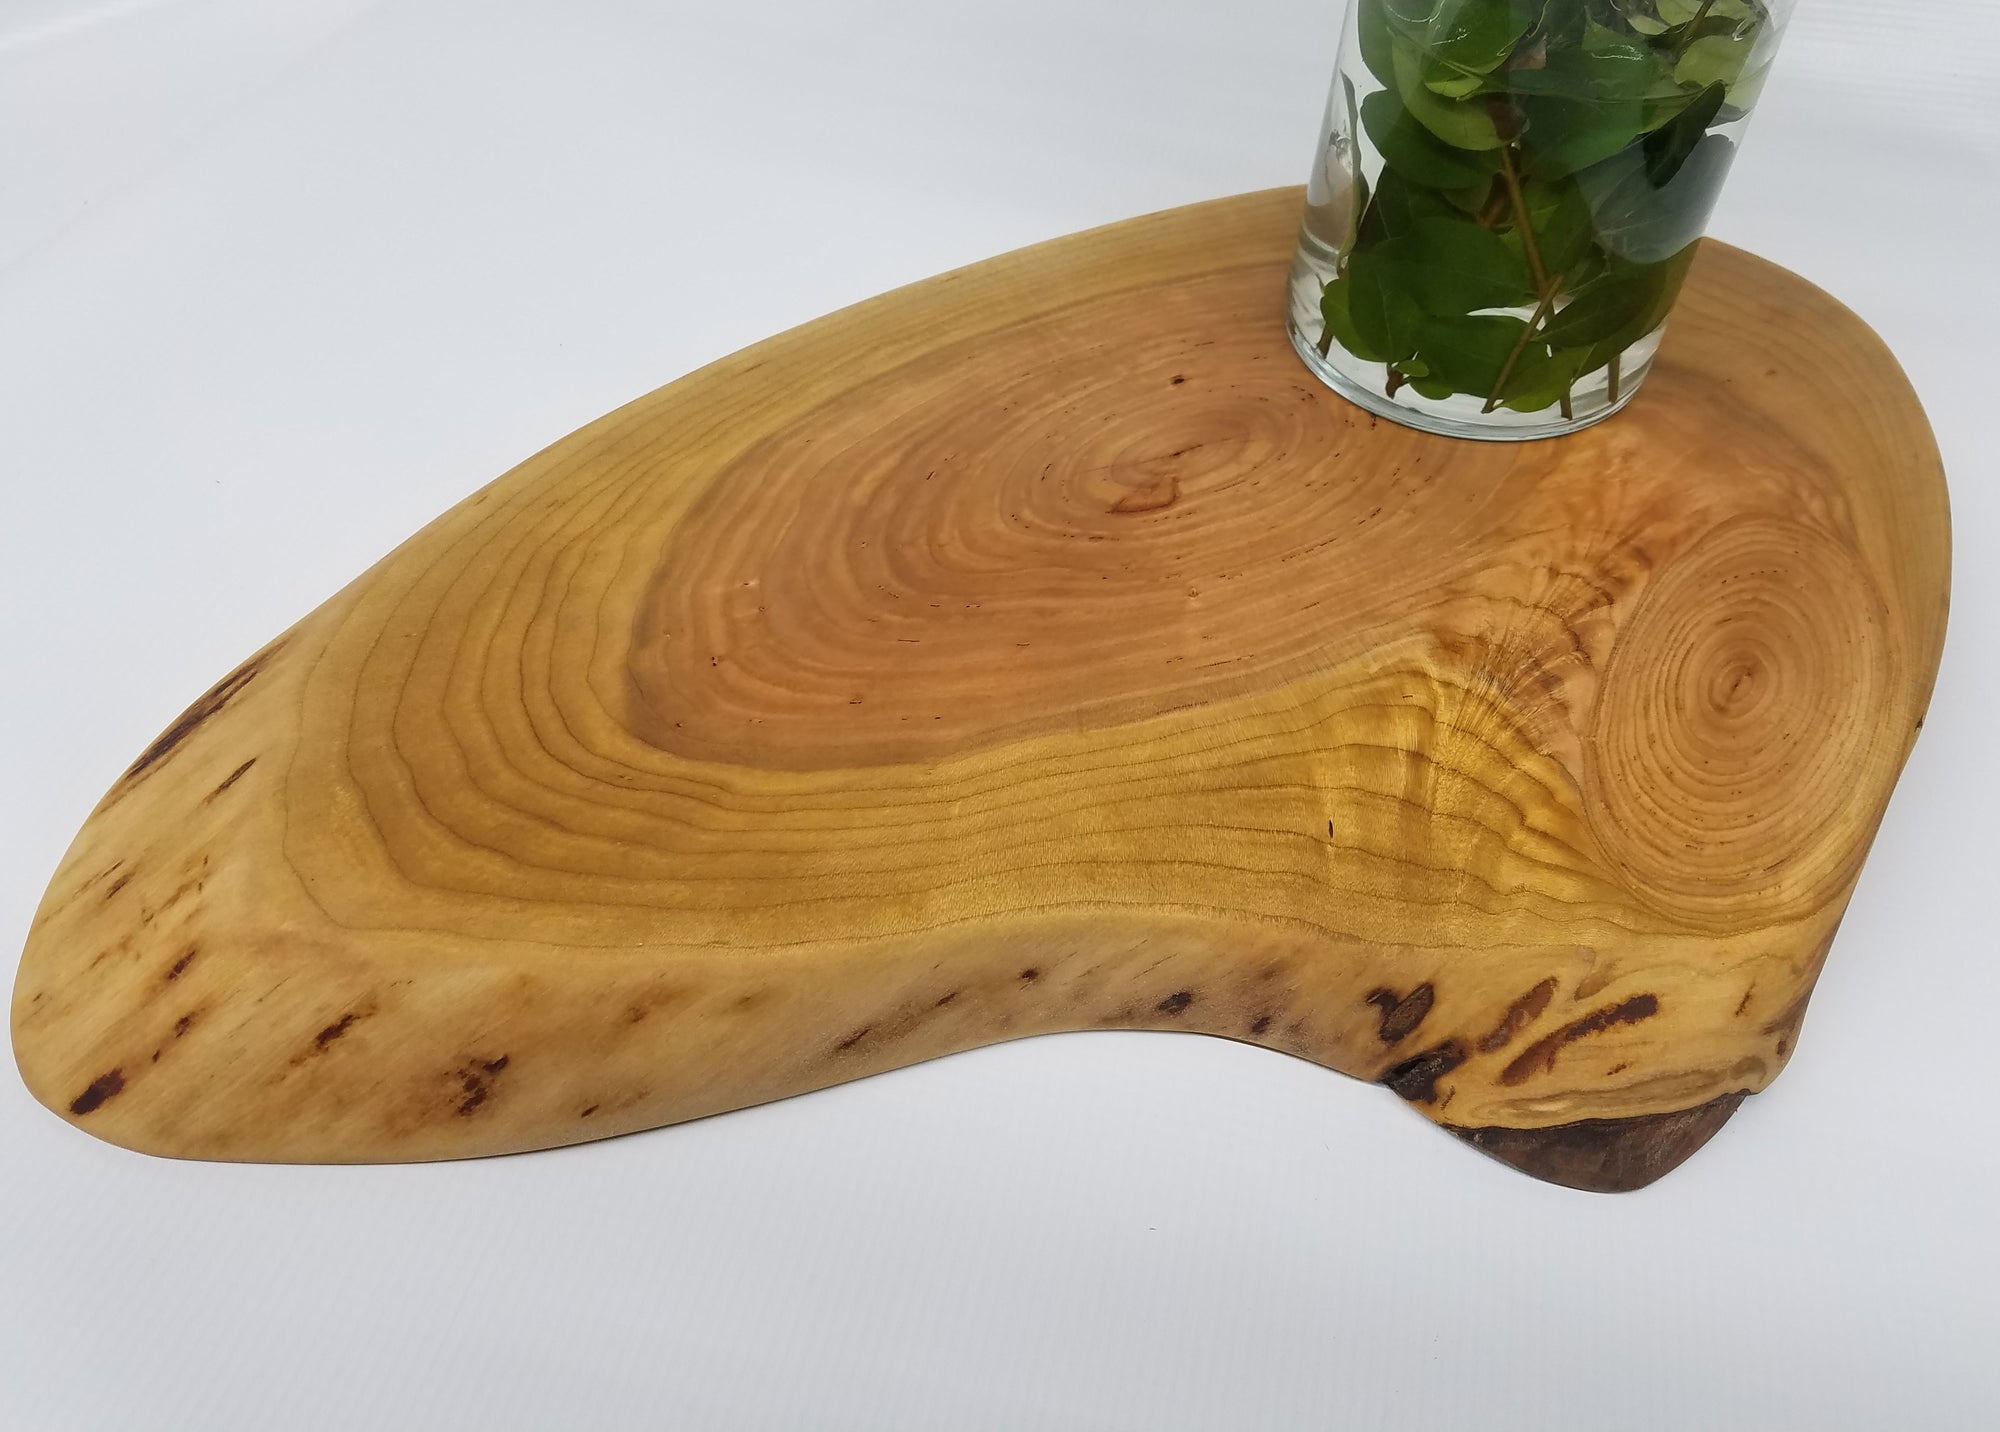 Wooden Charcuterie Board- Table Centerpiece- Crosscut Slab- Natural Wood- Serving Board- Food Safe- Live Edge Slab- Cherry- Christmas Gift